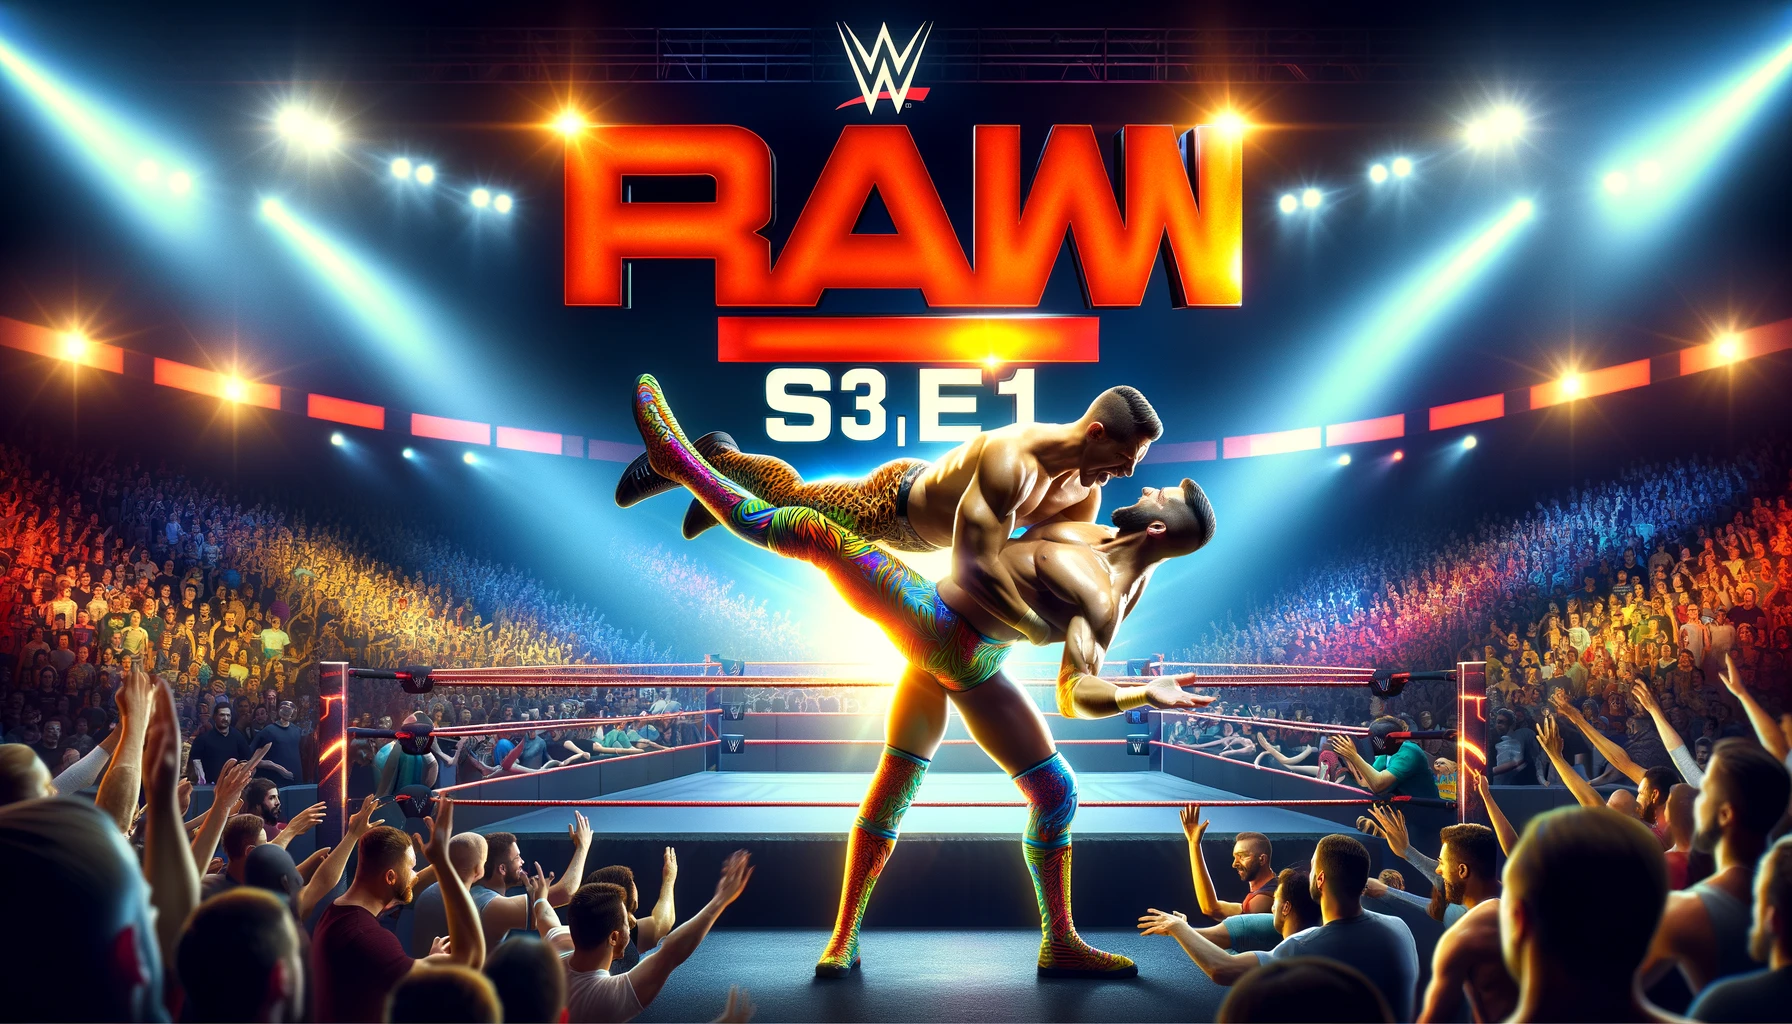 WWE Raw S31E1: A Spectacular Kickoff to the New Season